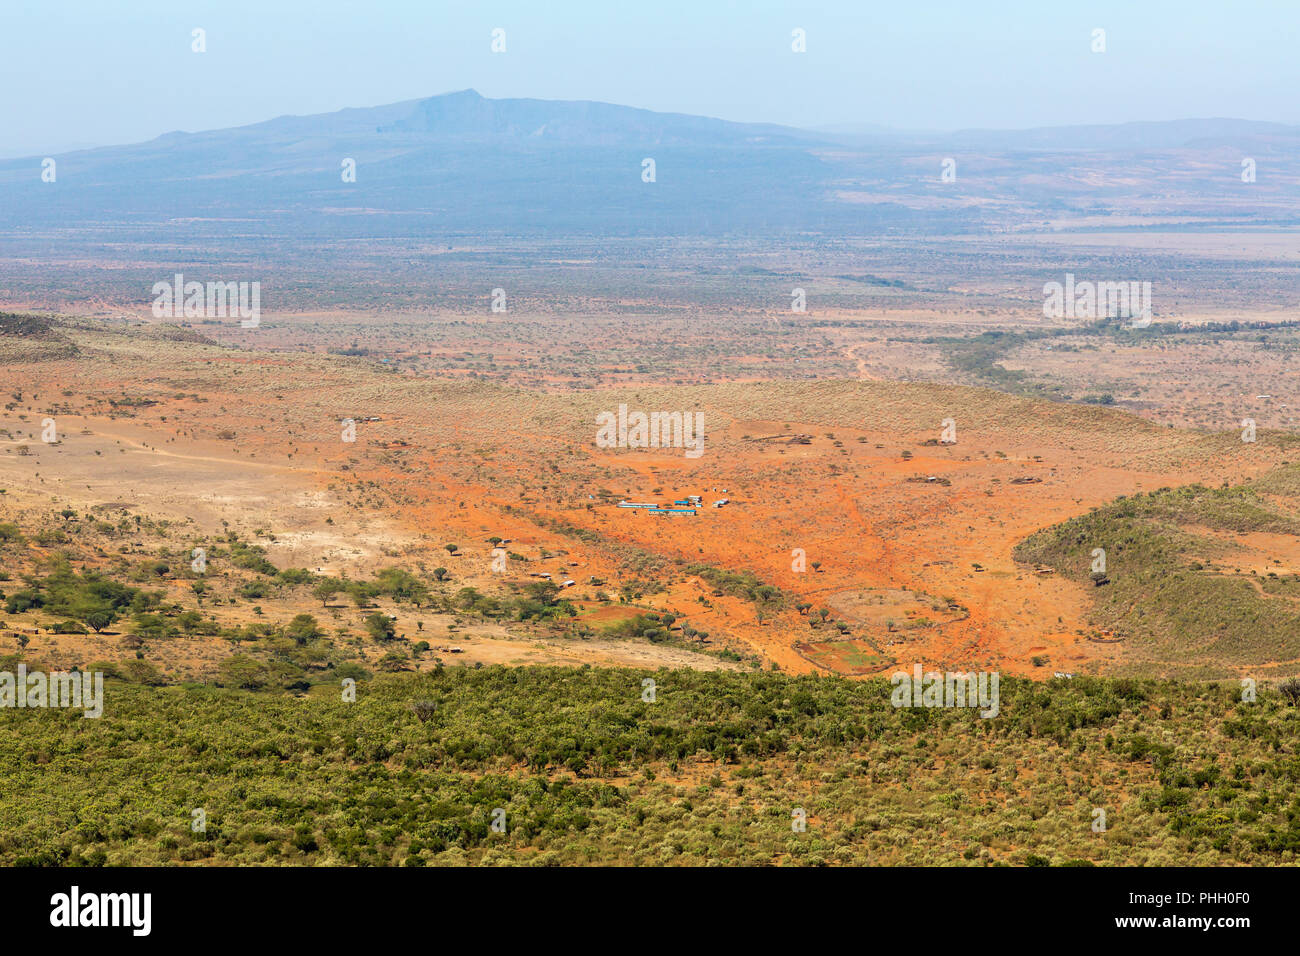 View of the Rift Valley landscape in Kenya Stock Photo